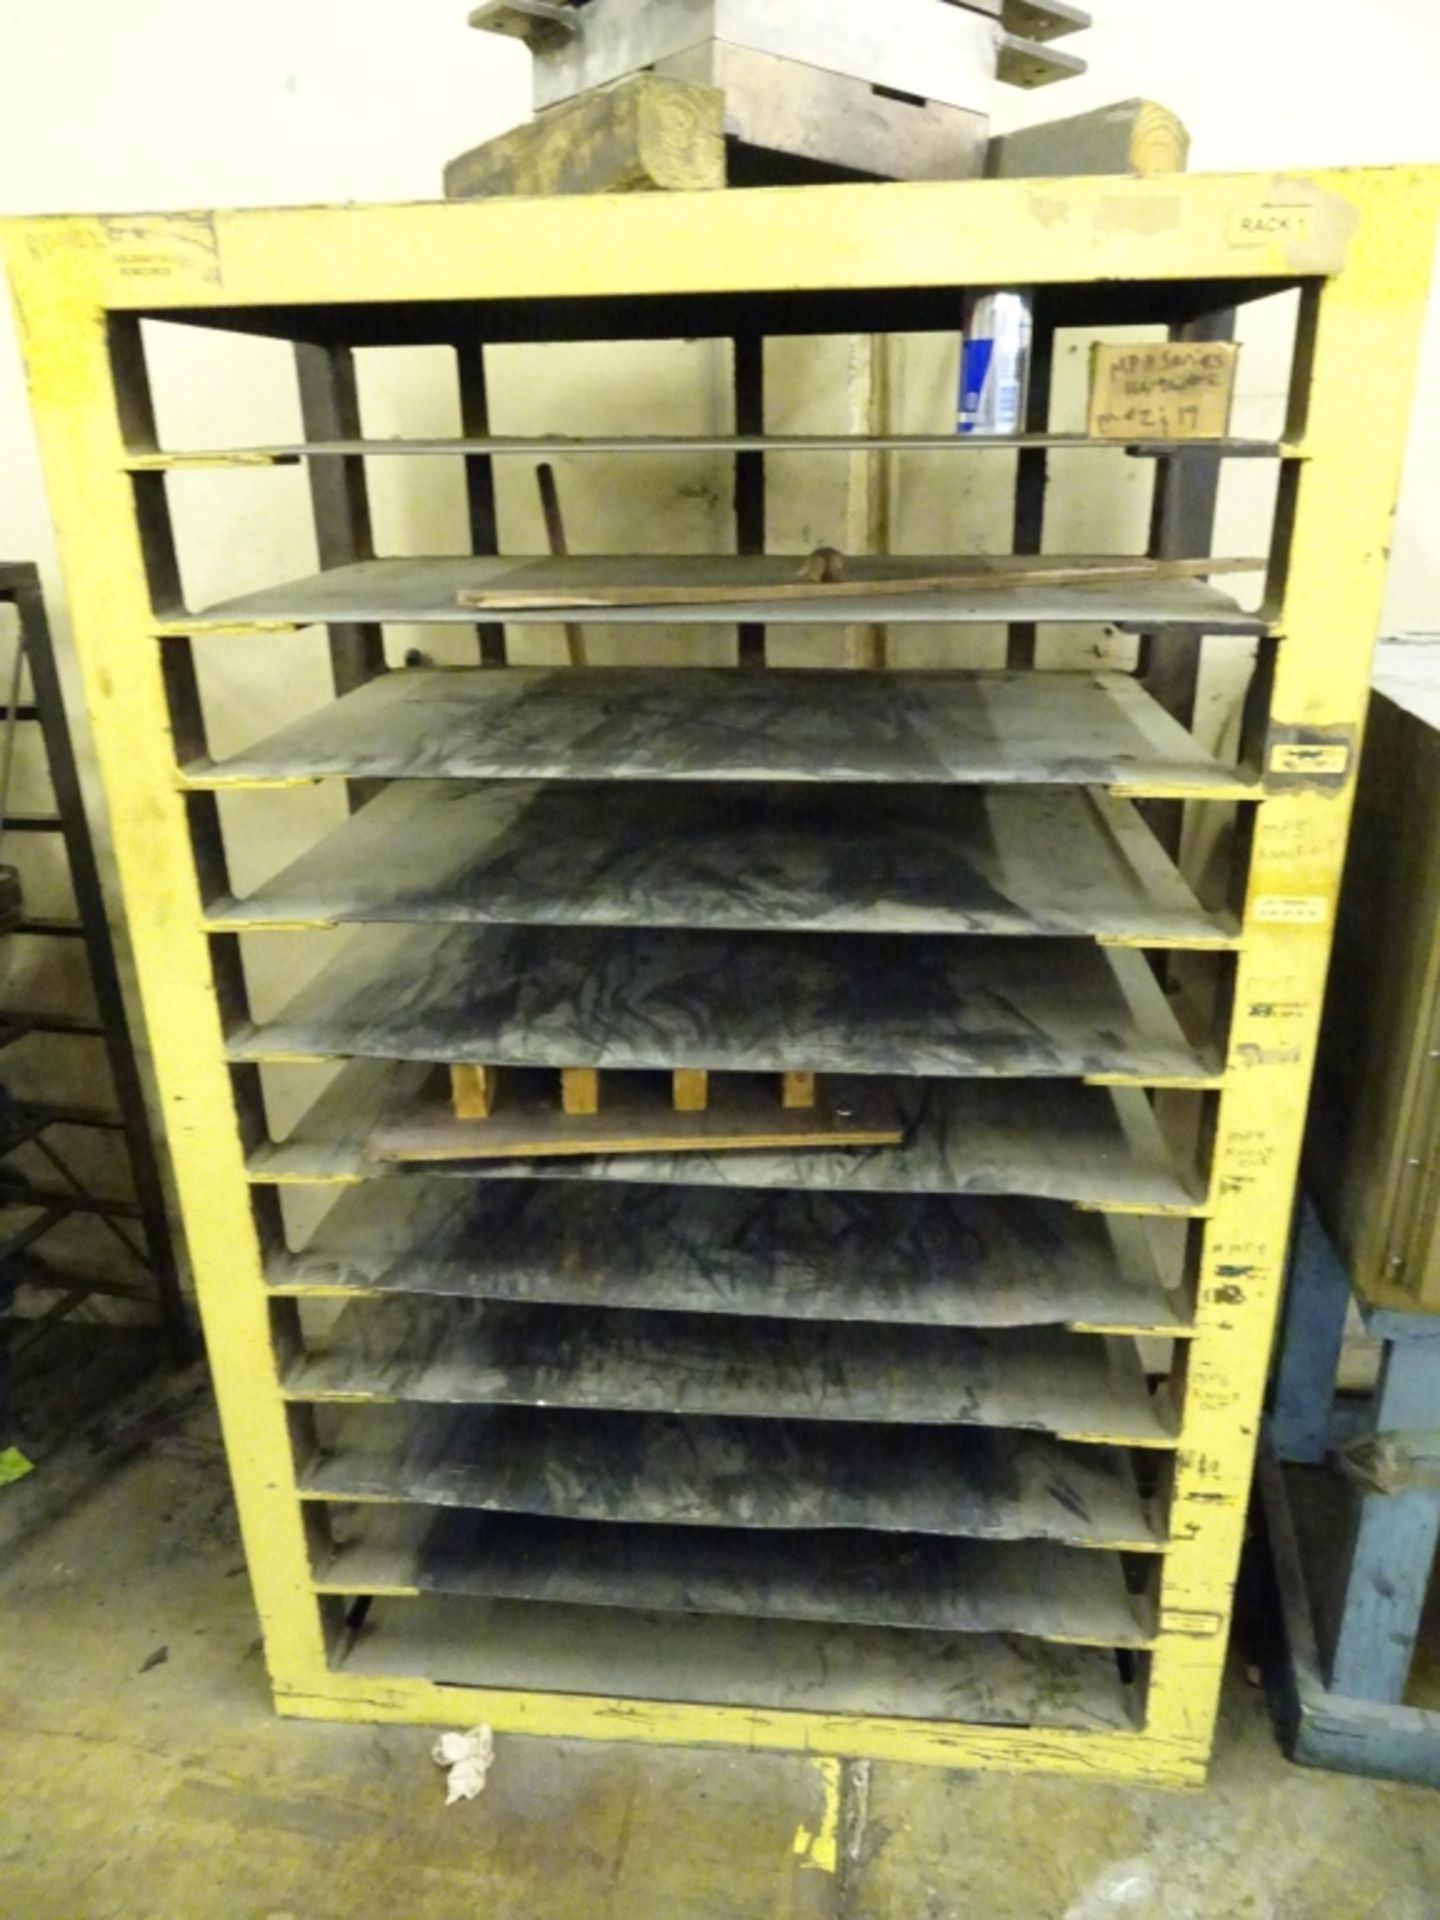 (14) Various Sized Heavy Duty Steel Mold Racks With No Contents - Image 3 of 6